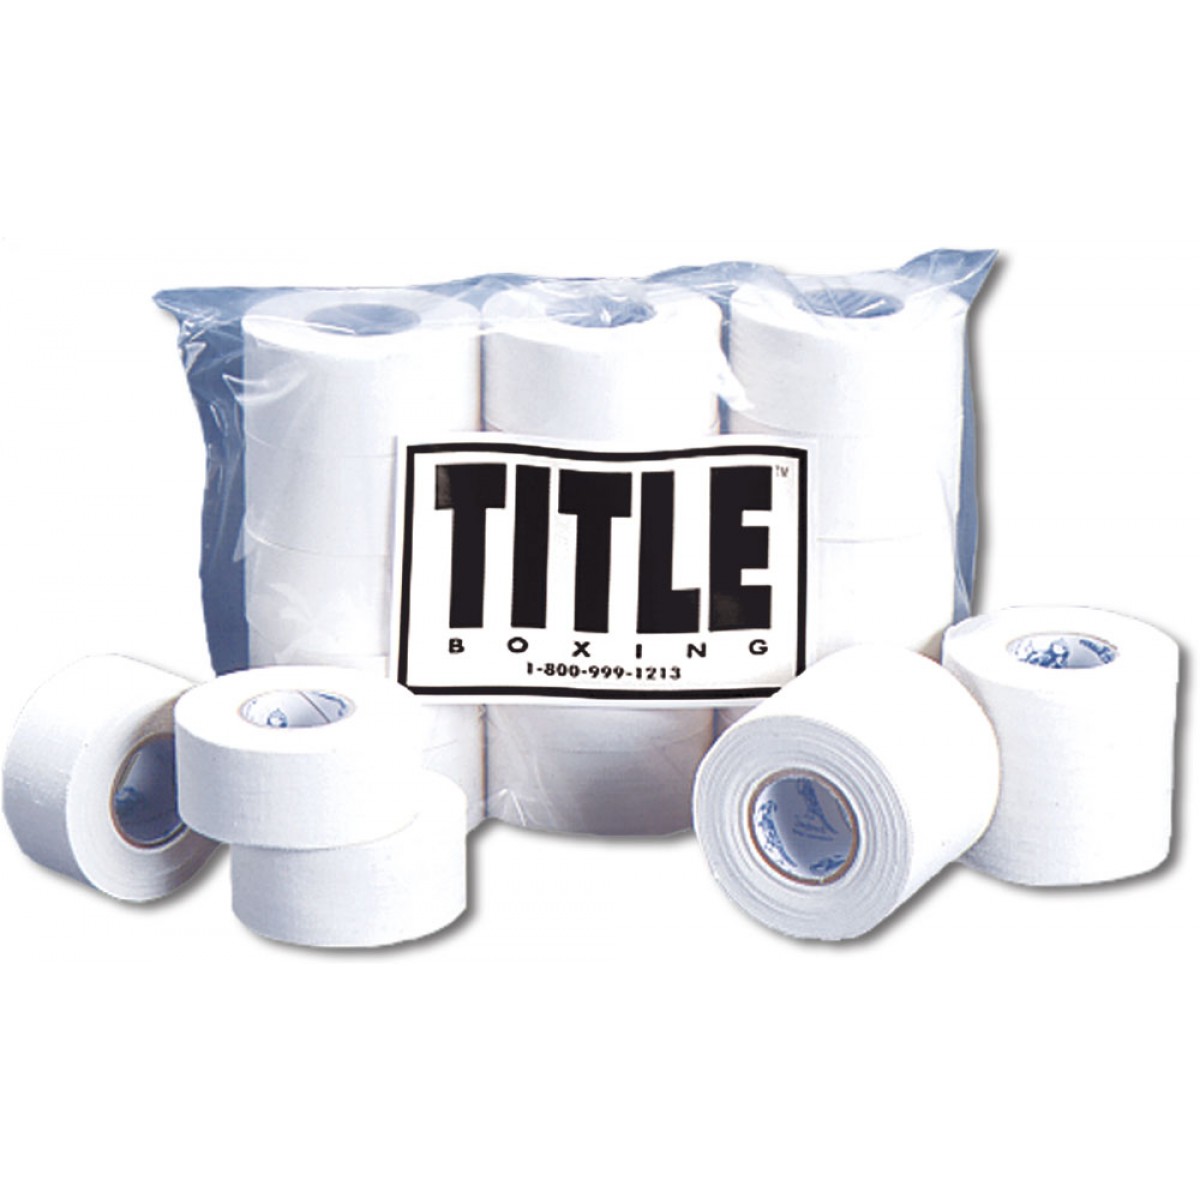 2 Rolls of Sports Tape White Cloth Boxing Tape Pro Quality 1" x 27 yd 